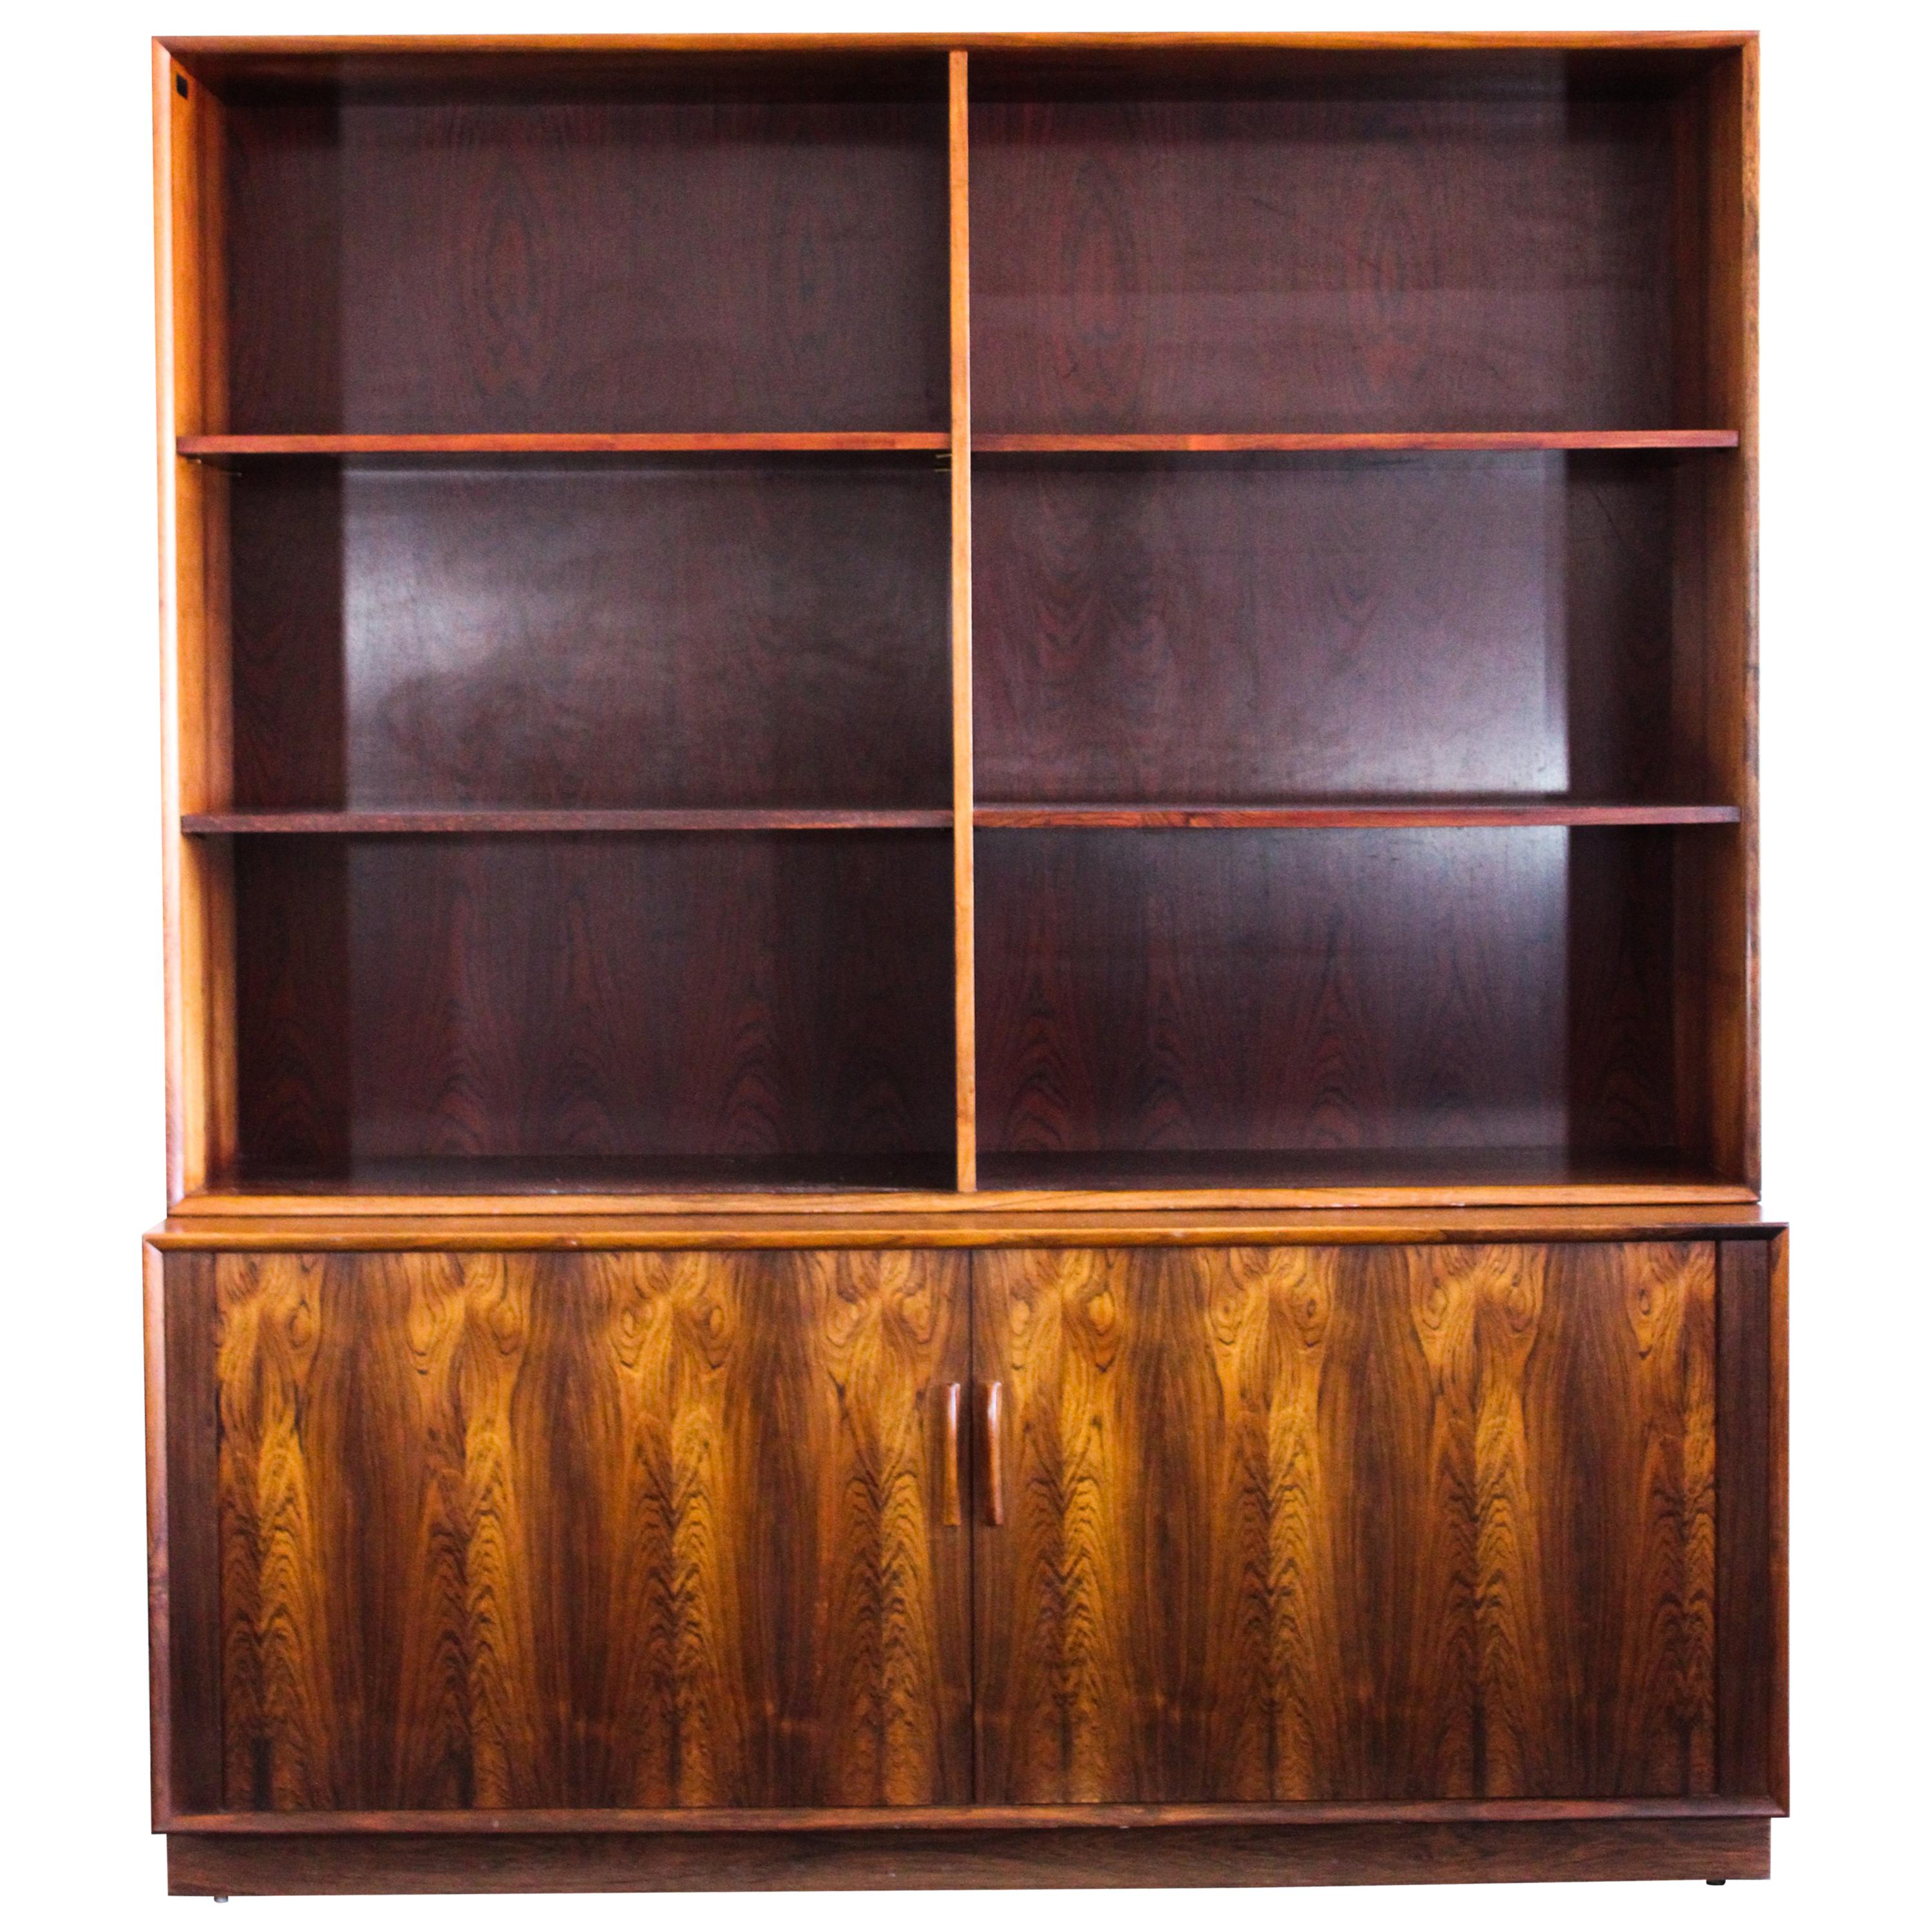 Midcentury Rosewood Arne Vodder Book Case with Tambour Doors by Sibast, 1950s For Sale